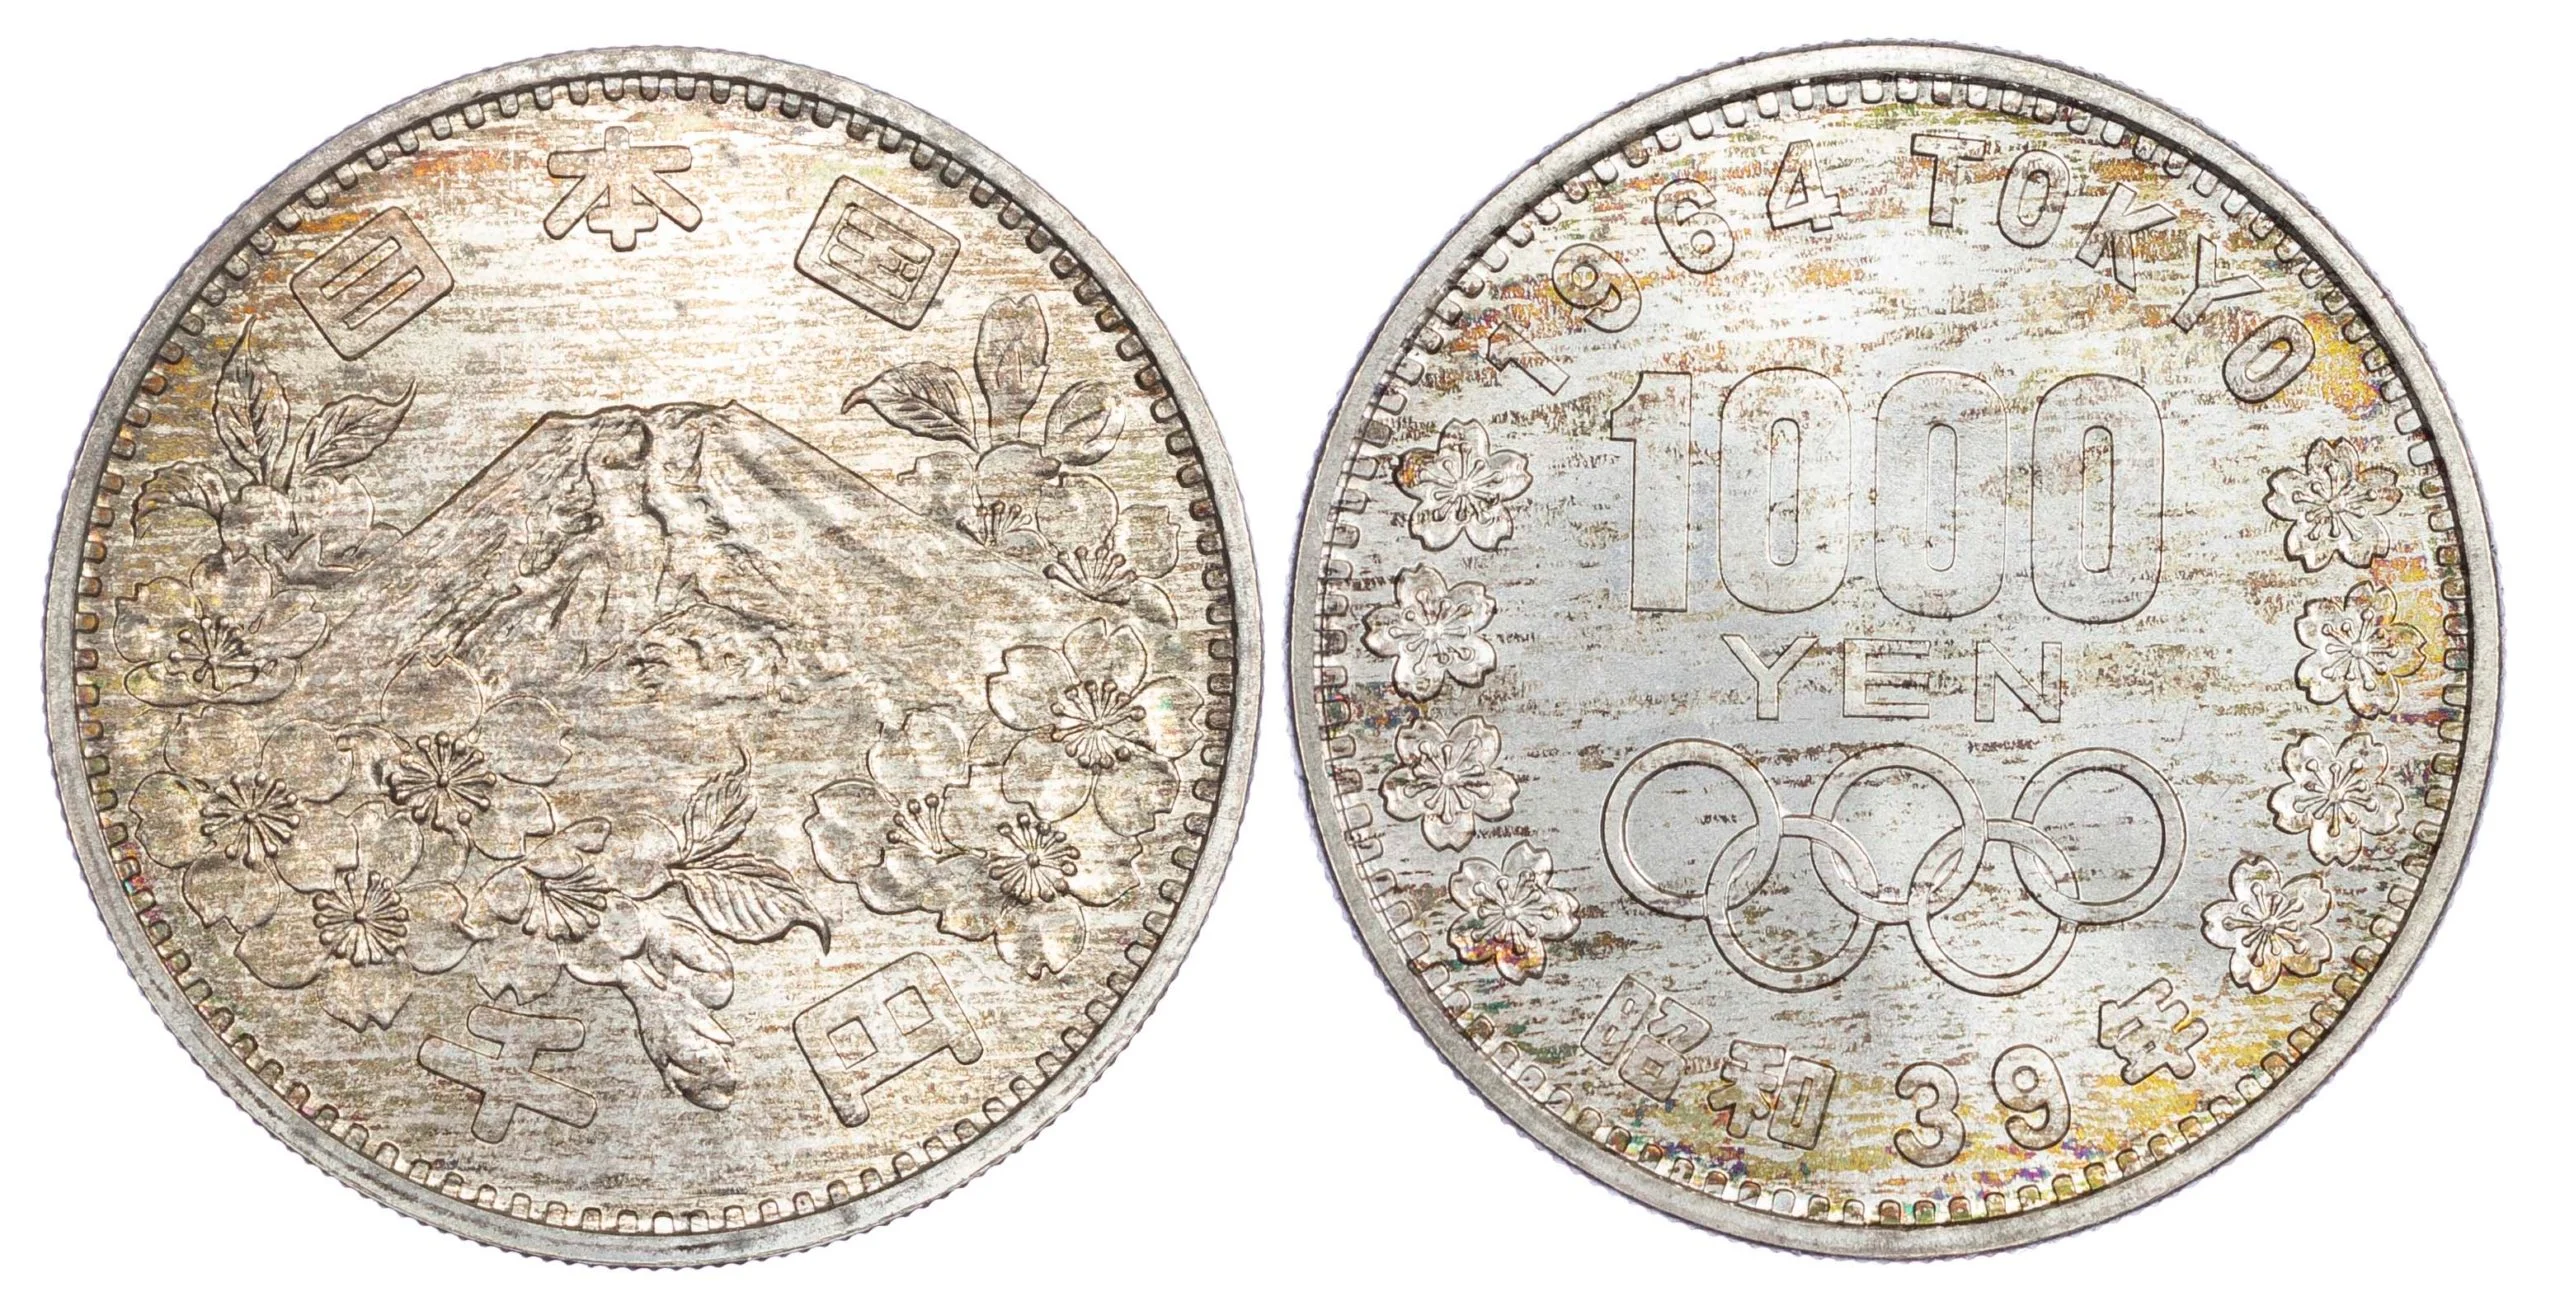 Japan Showa commemorative coin for the 1964 summer Olympic games with toning. Mount fuji on the obverse, the olympic rings on the reverse.